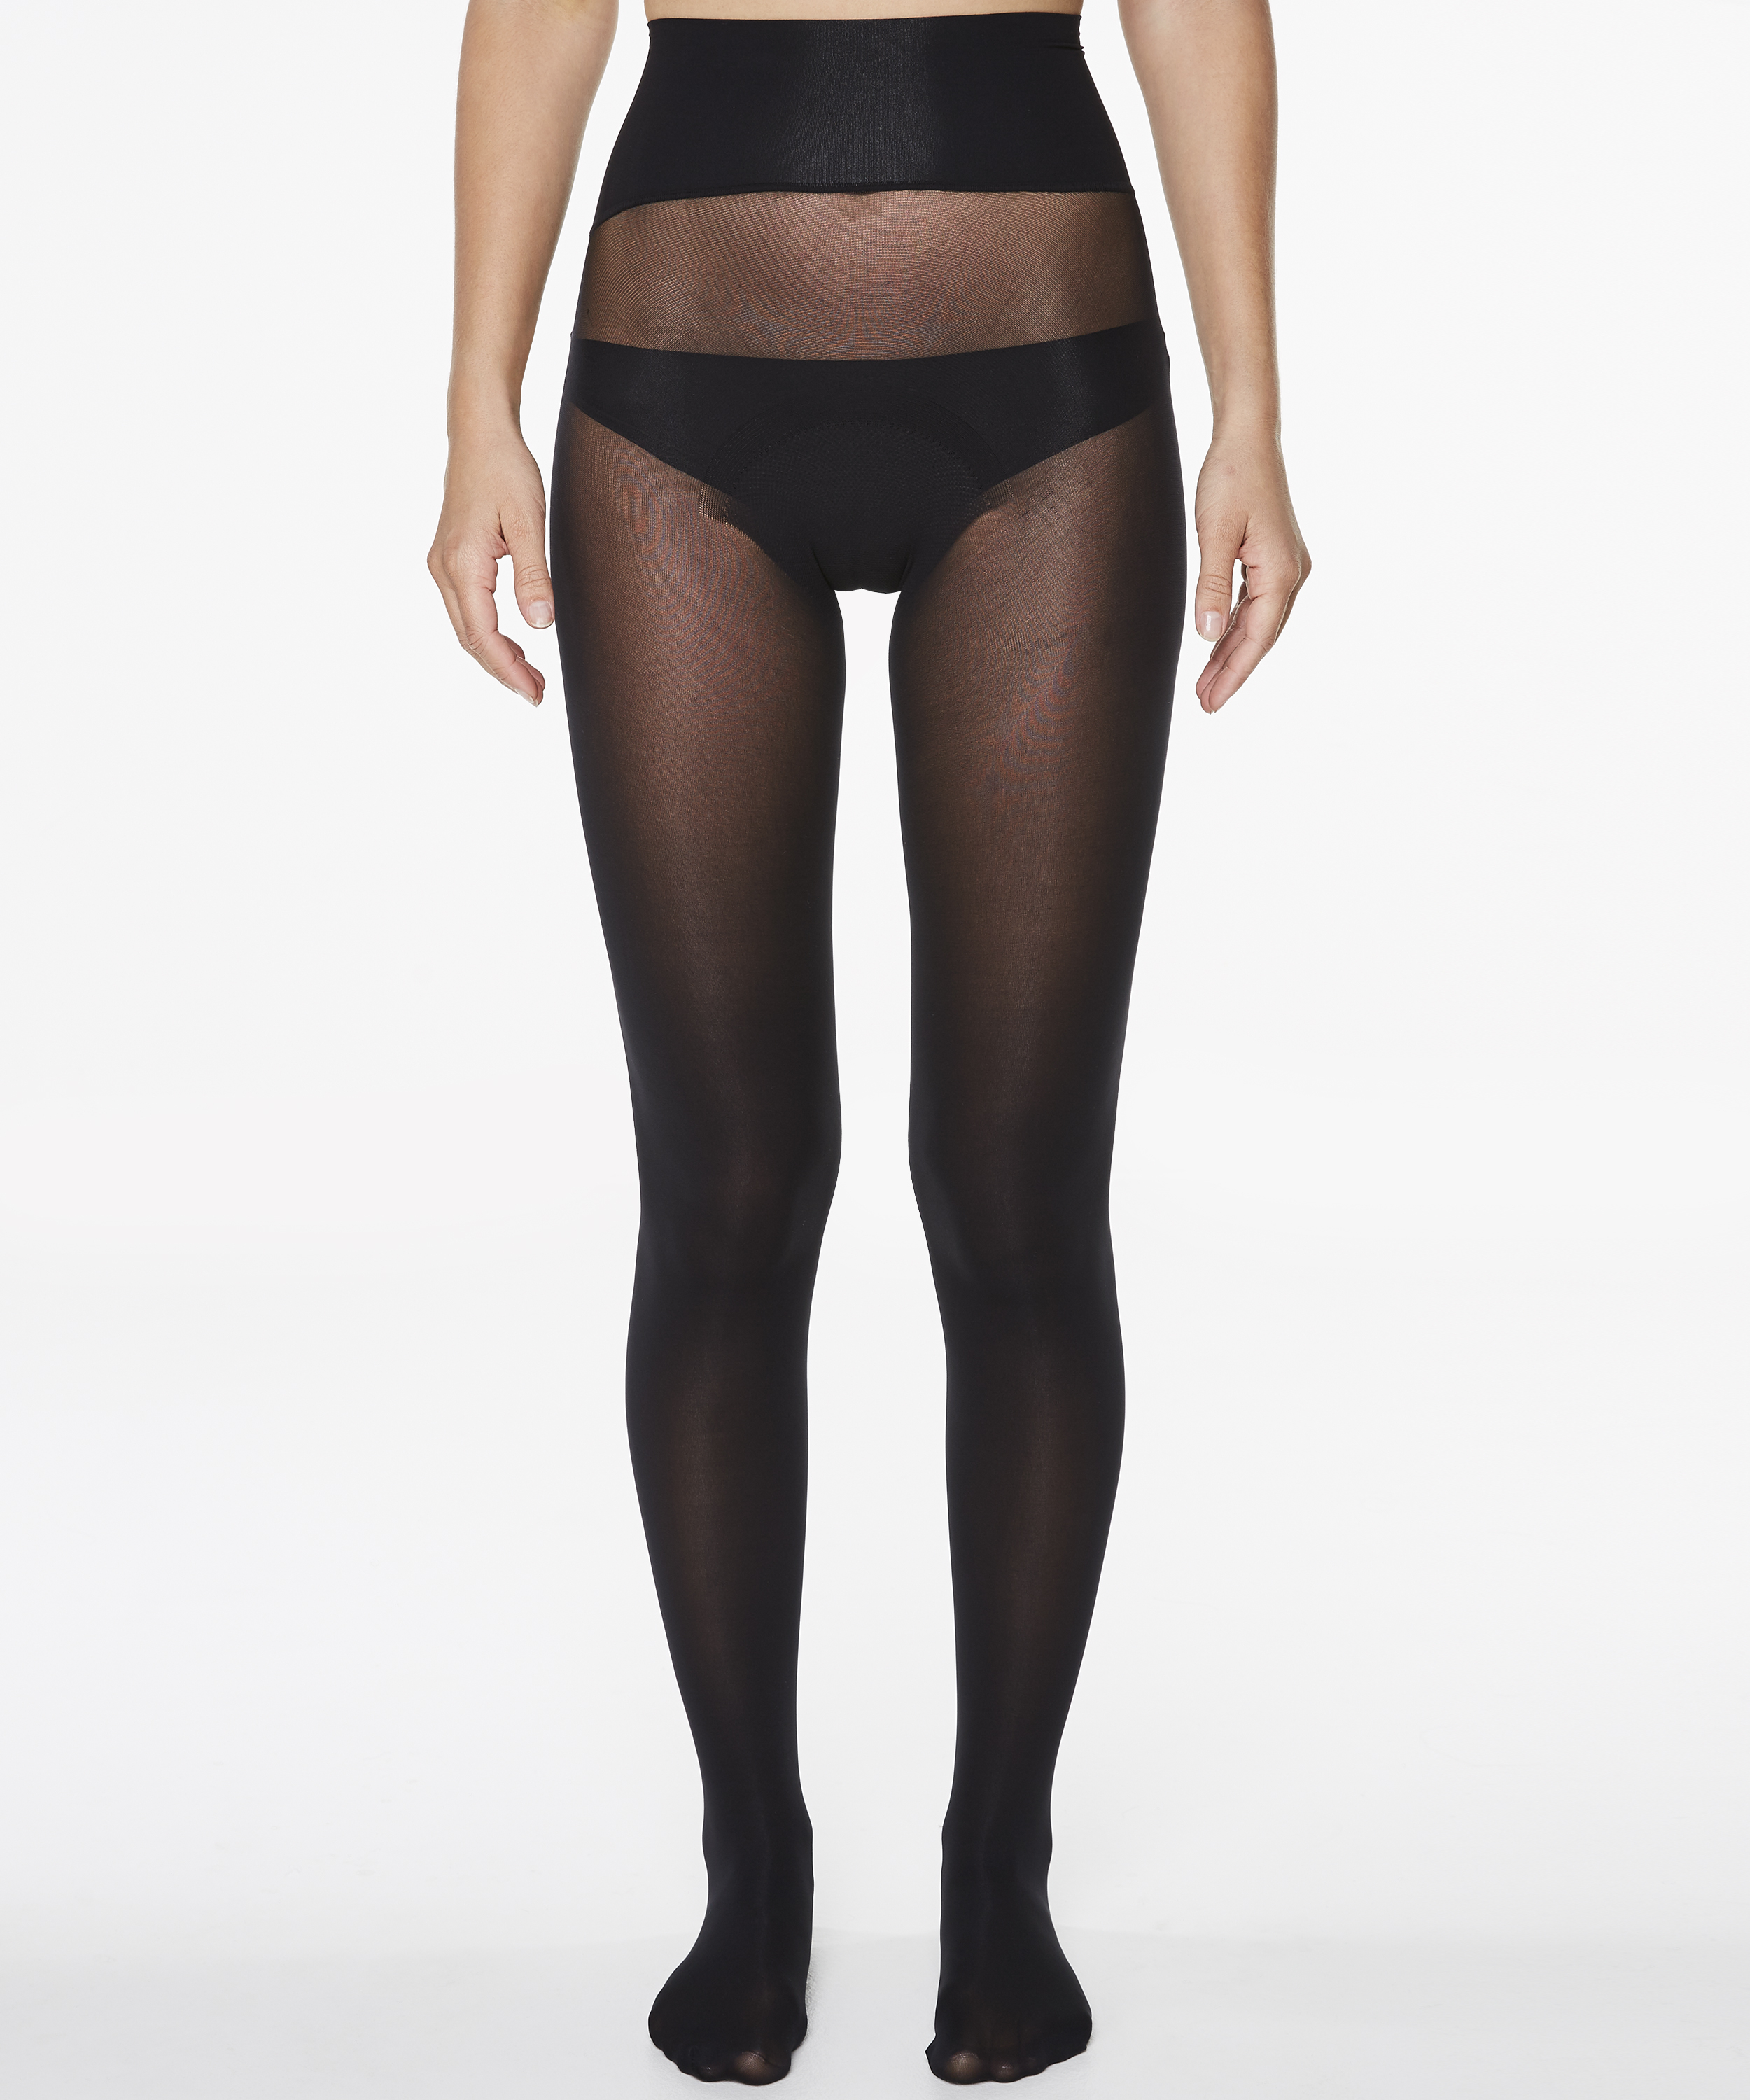 Two Pairs 40 Denier Tights for €3 - Multi-pack Collection - Hunkemöller